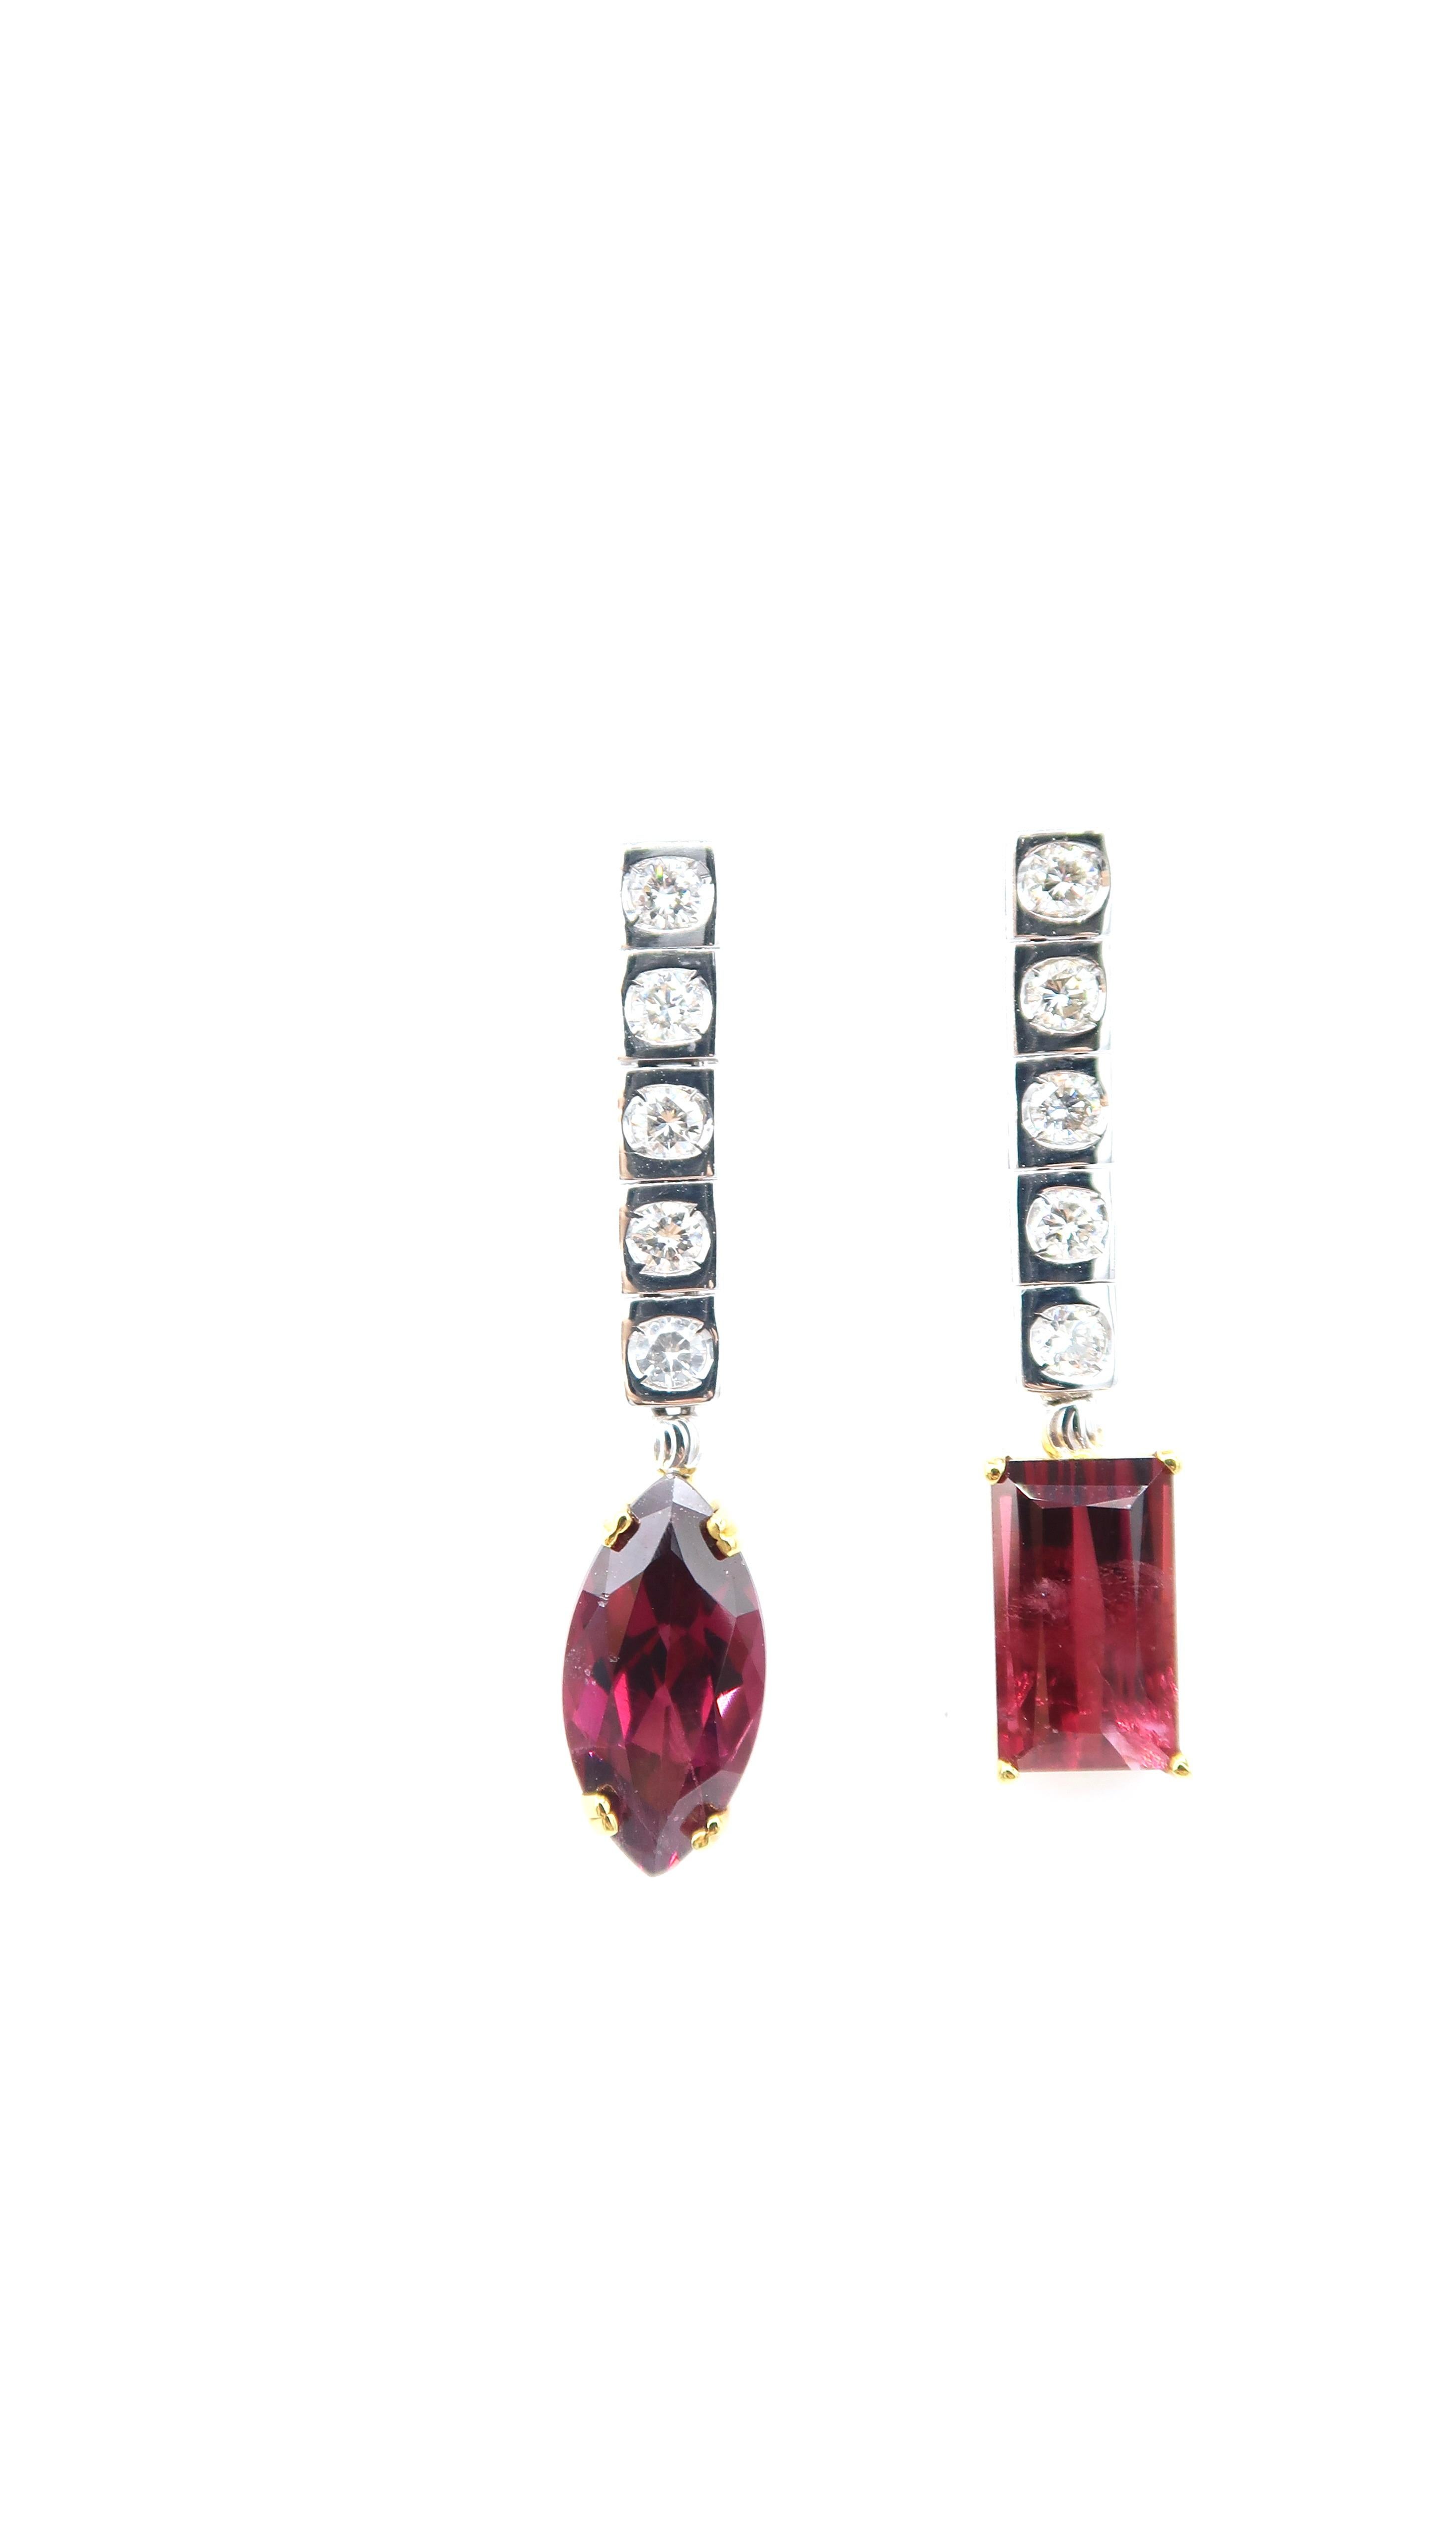 Square Shaped Long Tennis Earrings in 18K Gold with Round Diamonds and Mismatchedan Oblong Rubellite and a Marquis Rubellite

Gold: 18K Gold 7.3g.
Rubellite: 7.18cts.
Diamond: 0.50ct.

